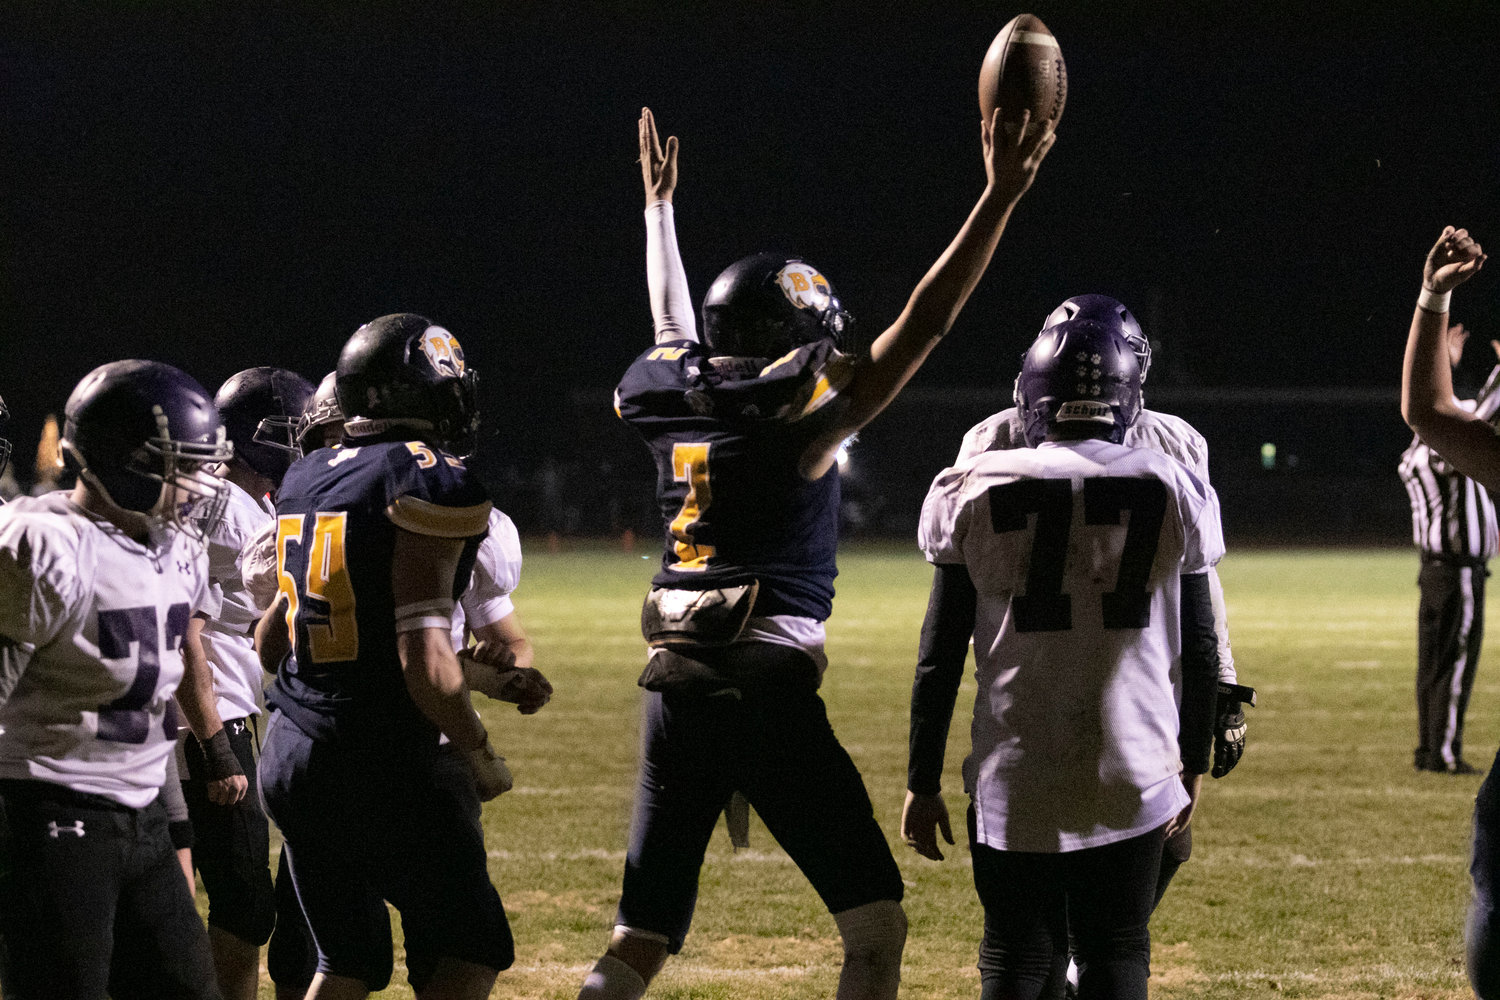 James Anderson holds up the football after scoring a touch down in the first quarter.